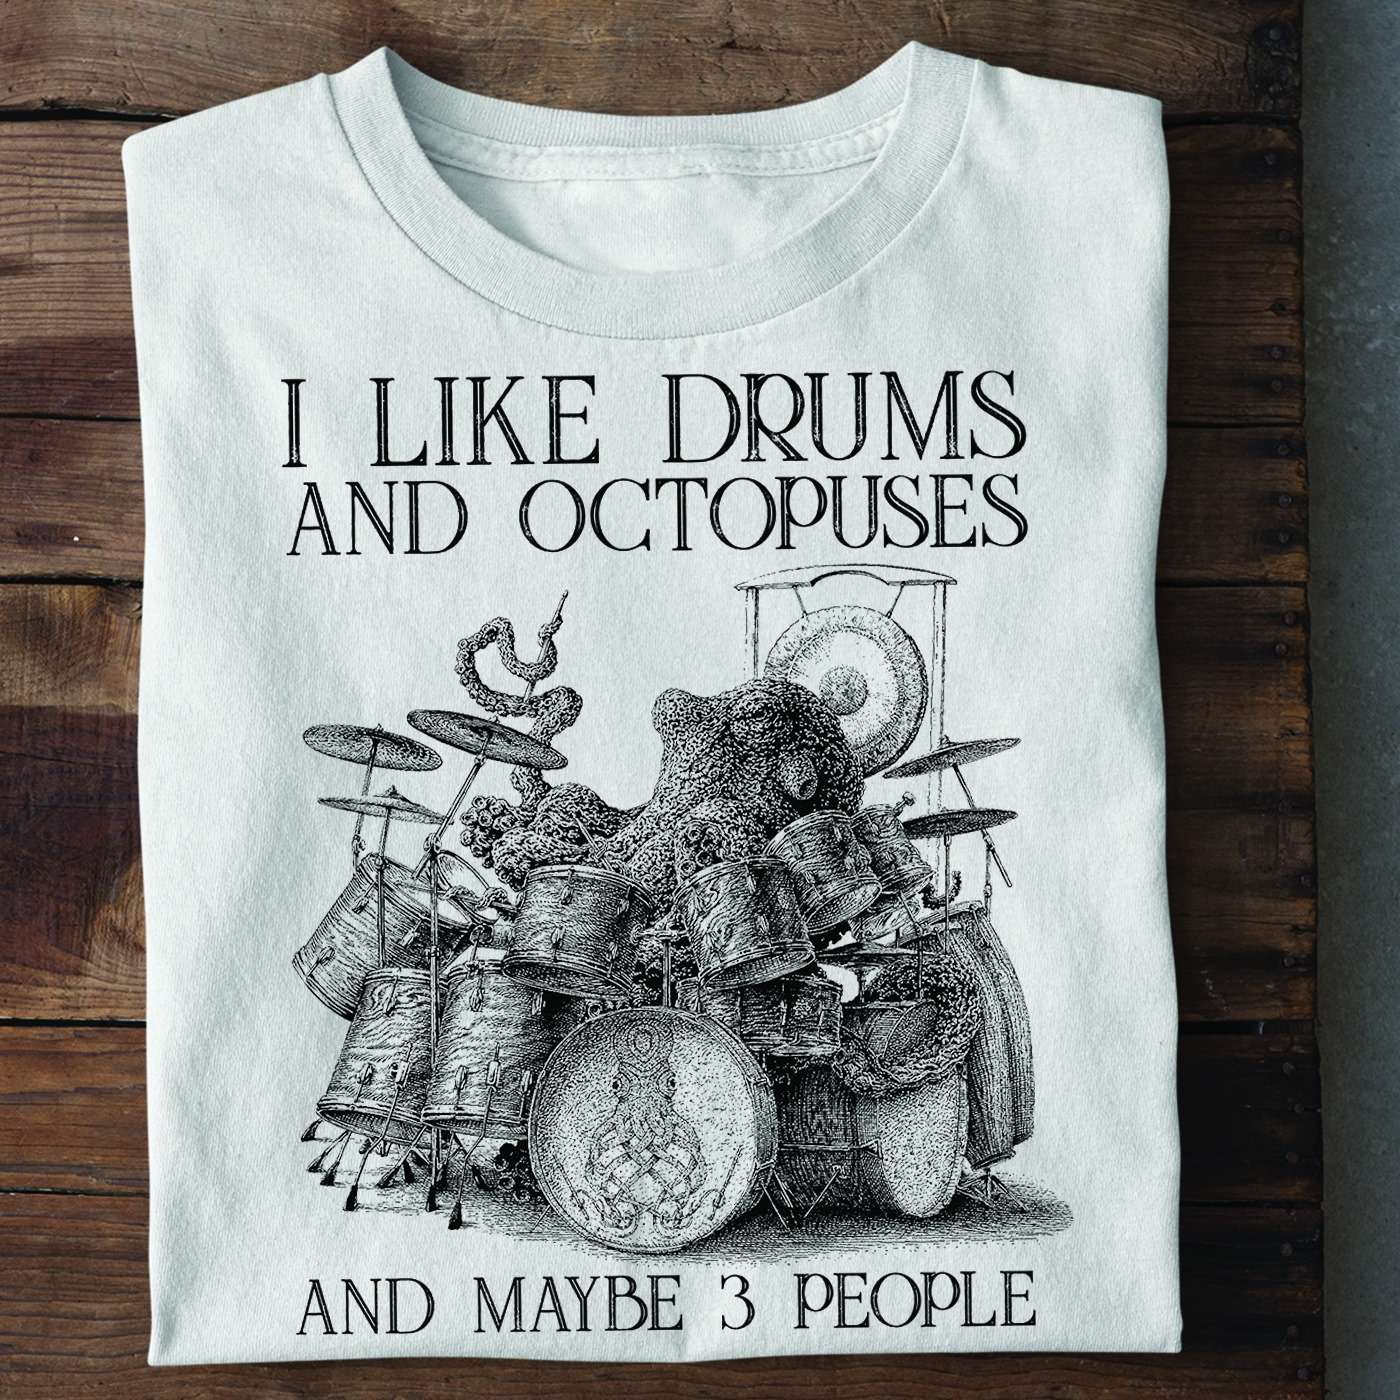 I like drums and octopuses and maybe 3 people - Octopus playing drum